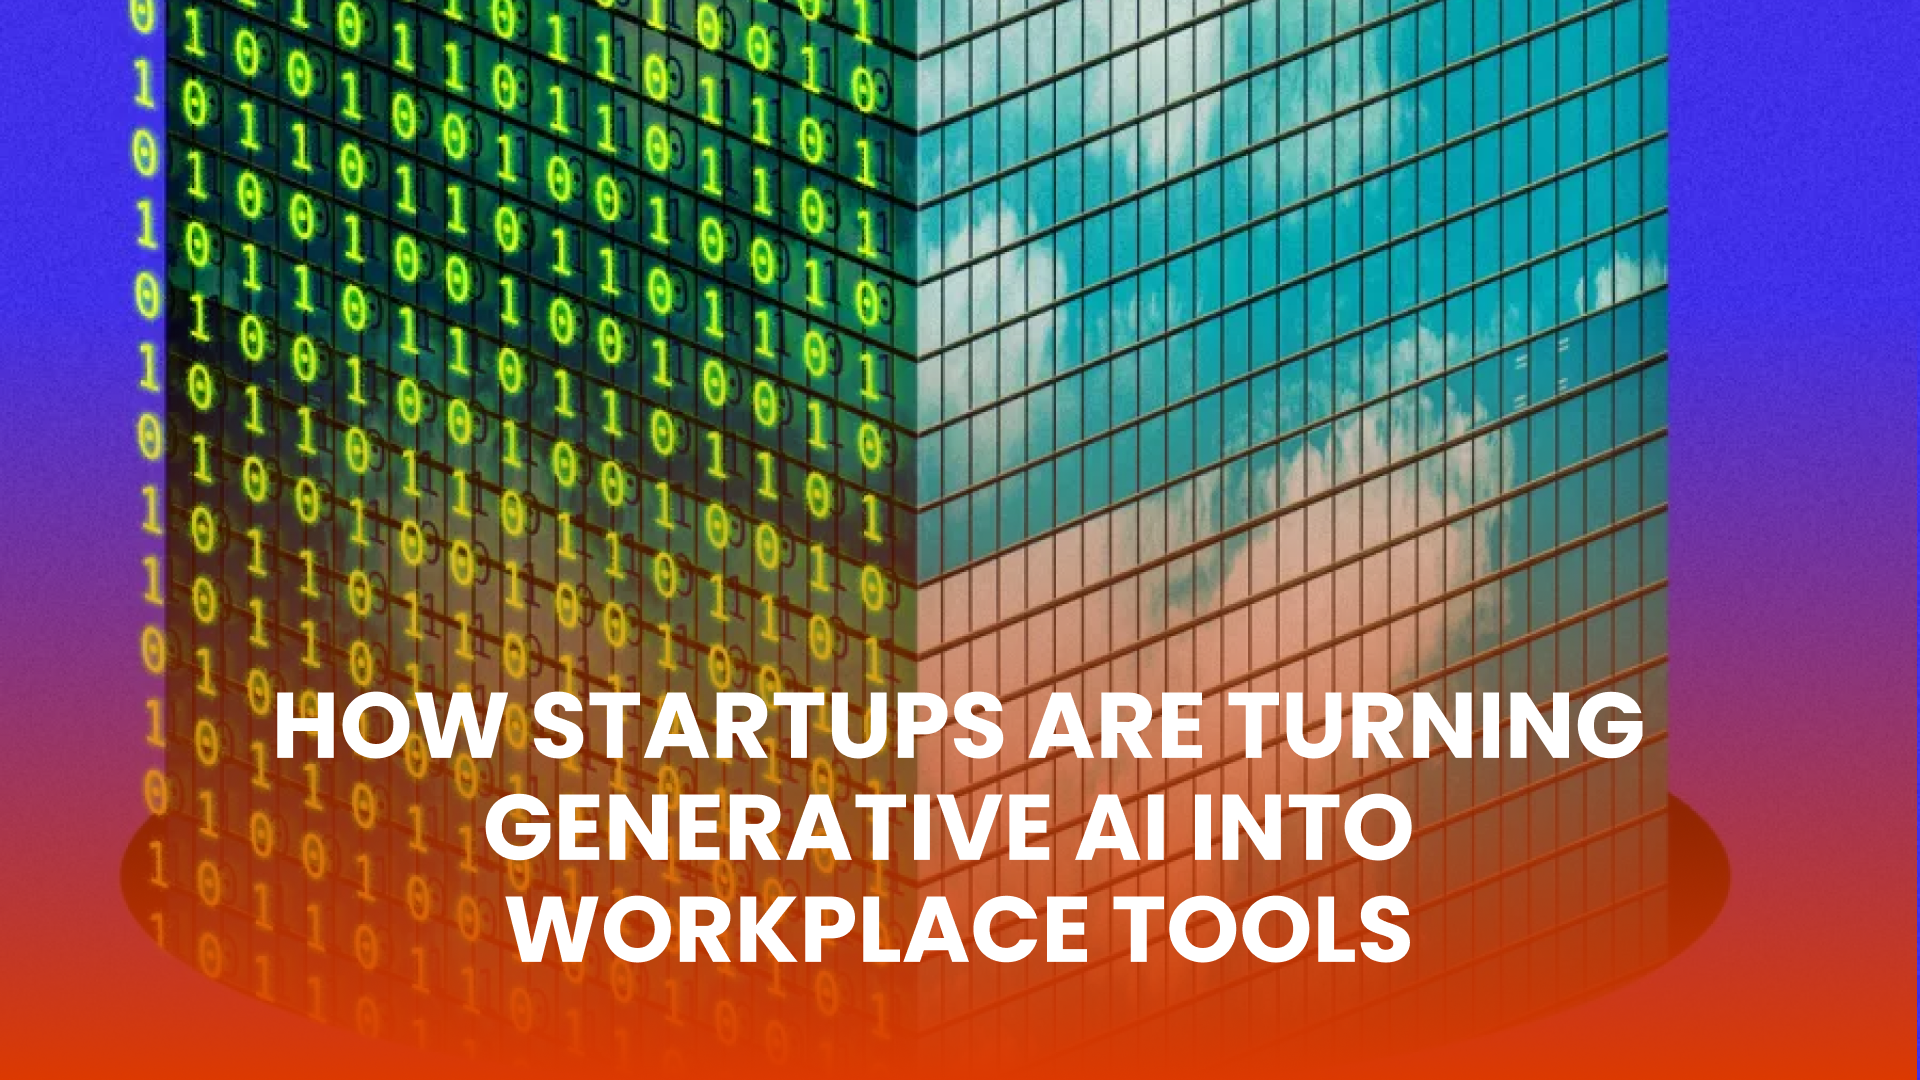 How enterprise startups are turning generative AI/large language models (LLMs) into workplace tools